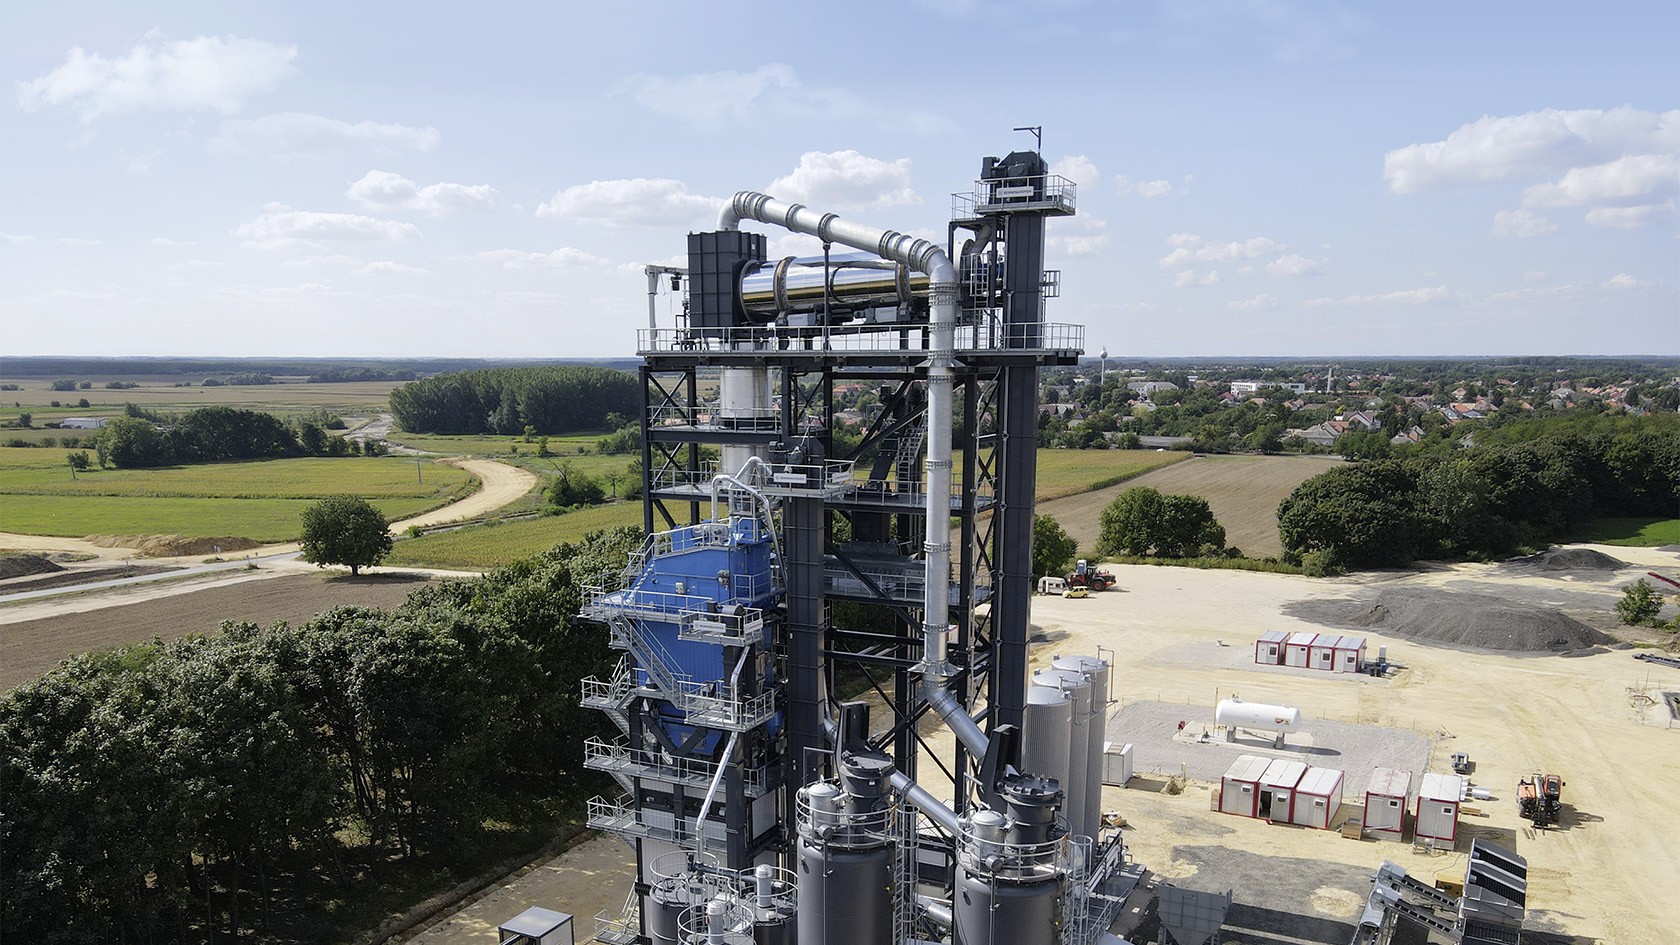 Hungary’s first mixing plant with 70 % recycled material content